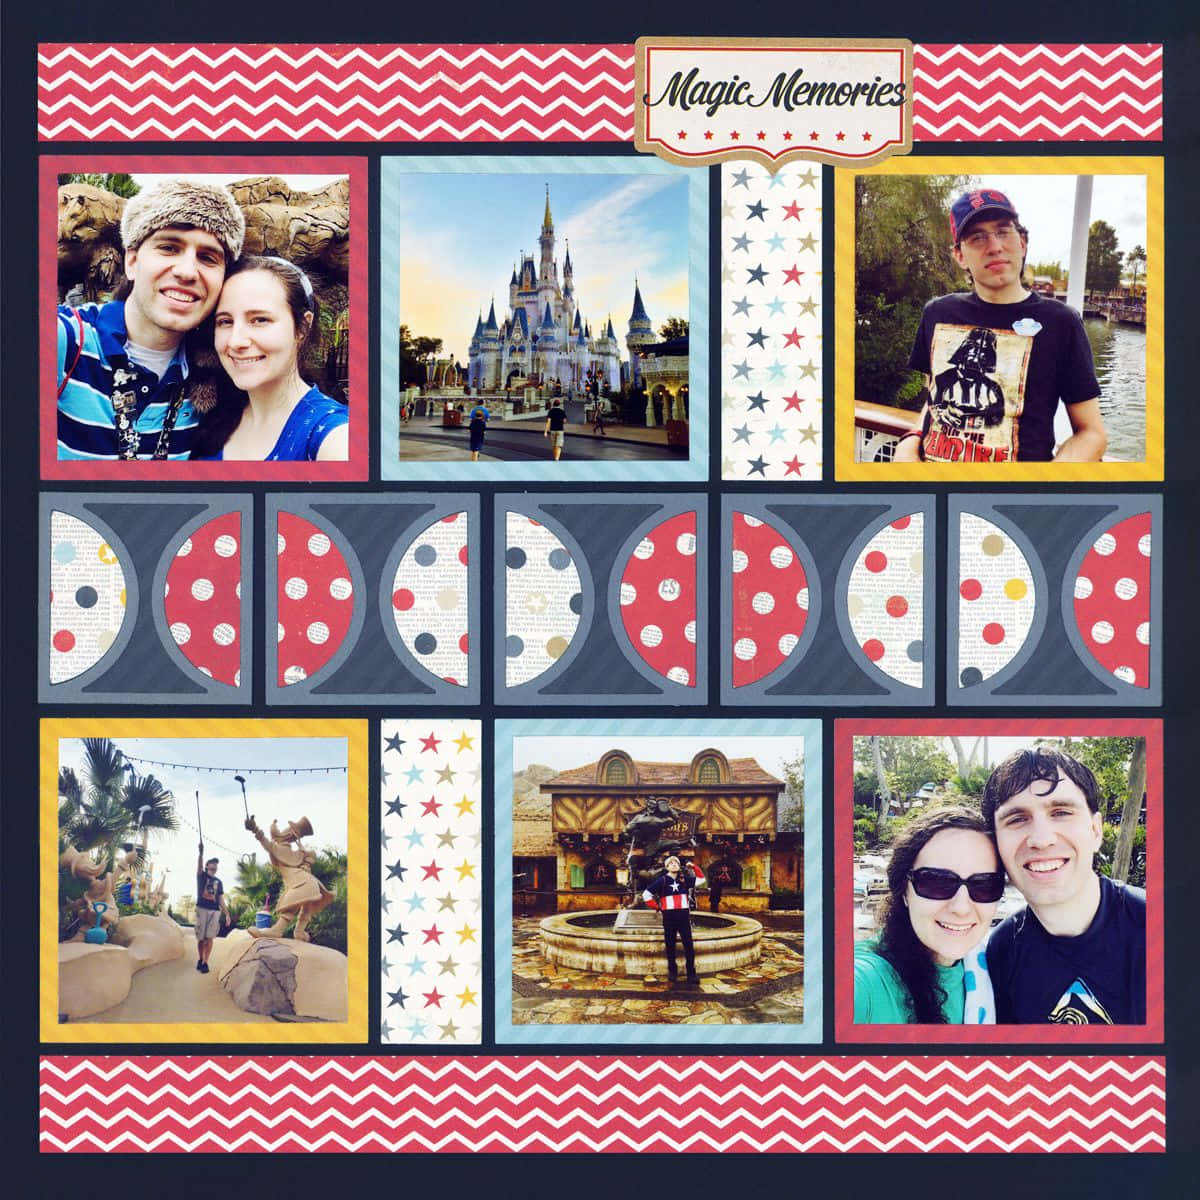 Get Creative With Your Scrapbooking Ideas!